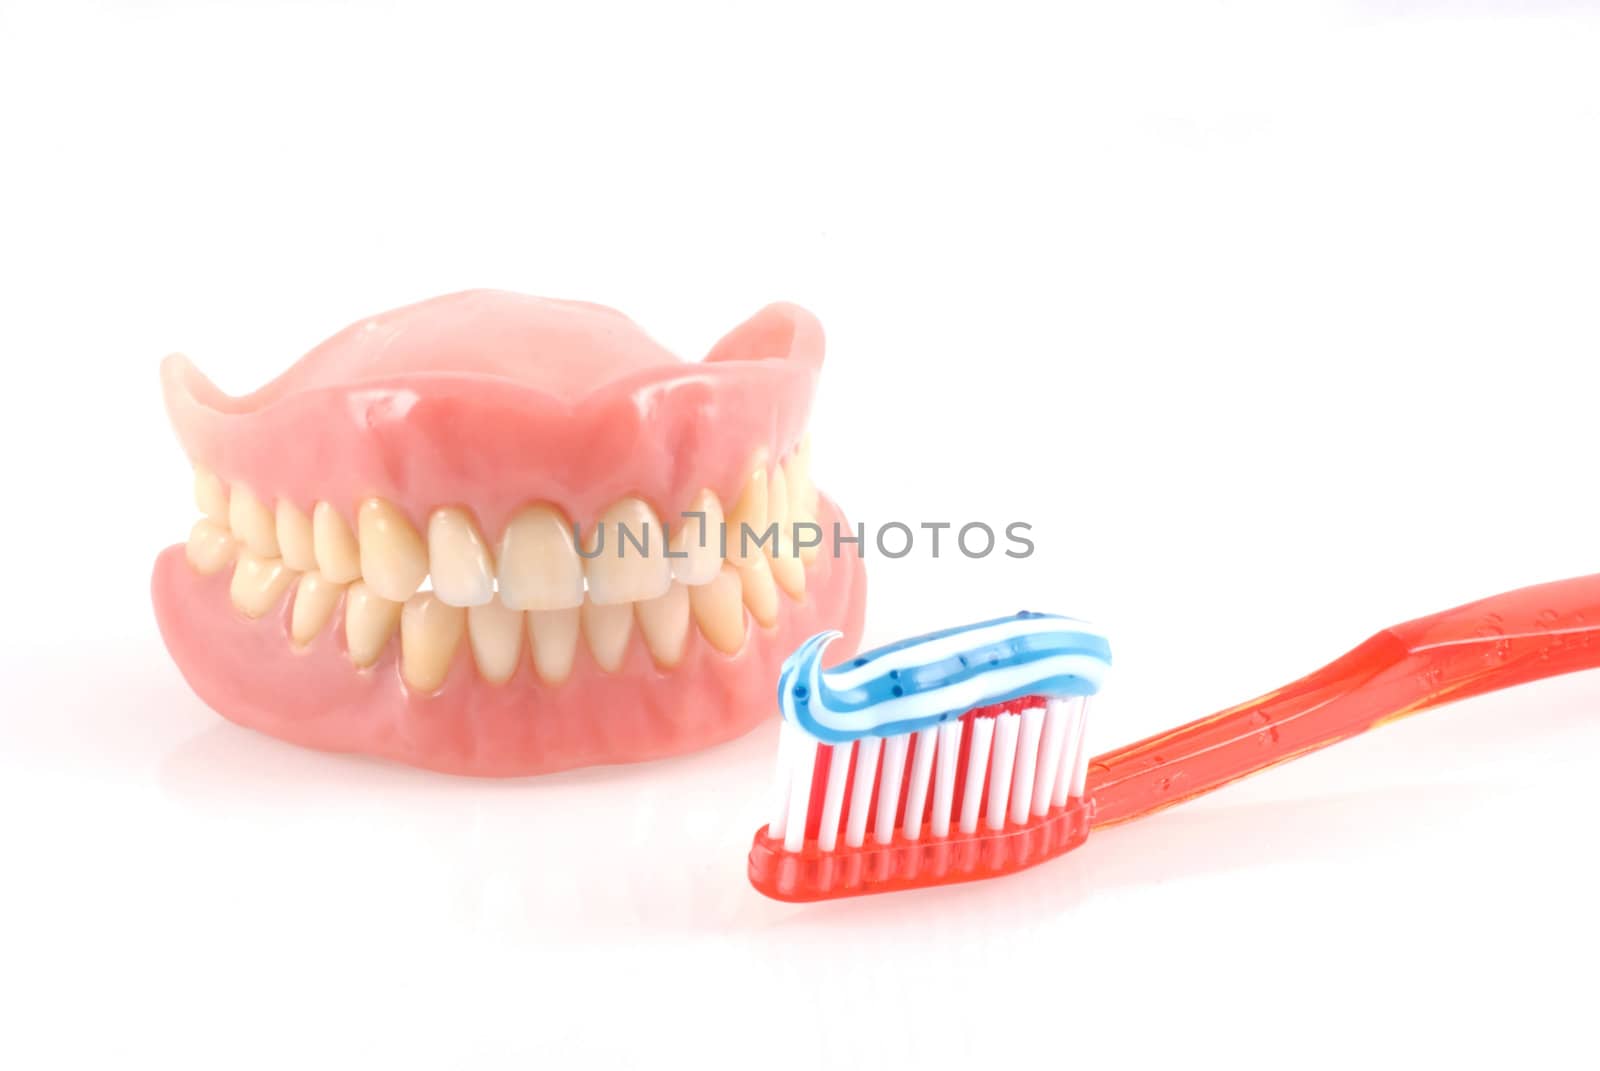 Dentures and toothbrush with toothpaste isolated on white.